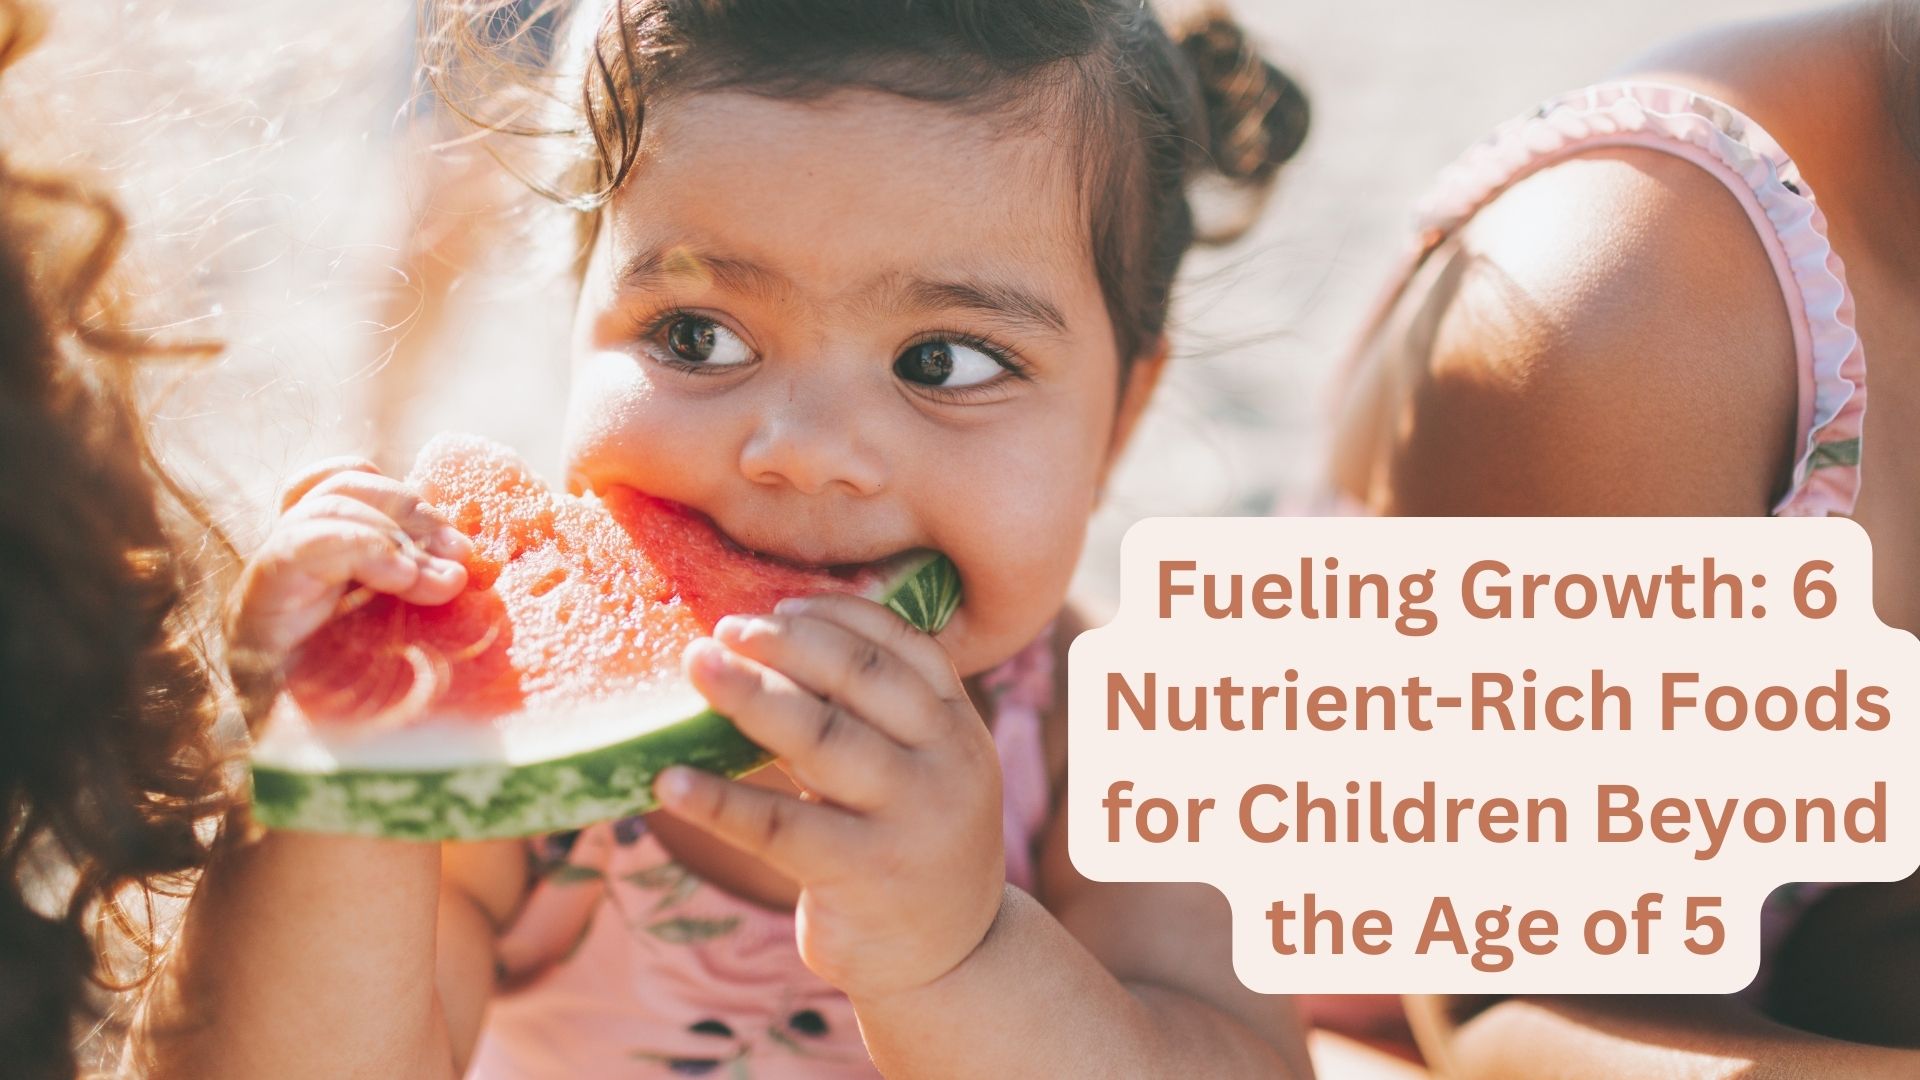 Fueling Growth: 6 Nutrient-Rich Foods for Children Beyond the Age of 5